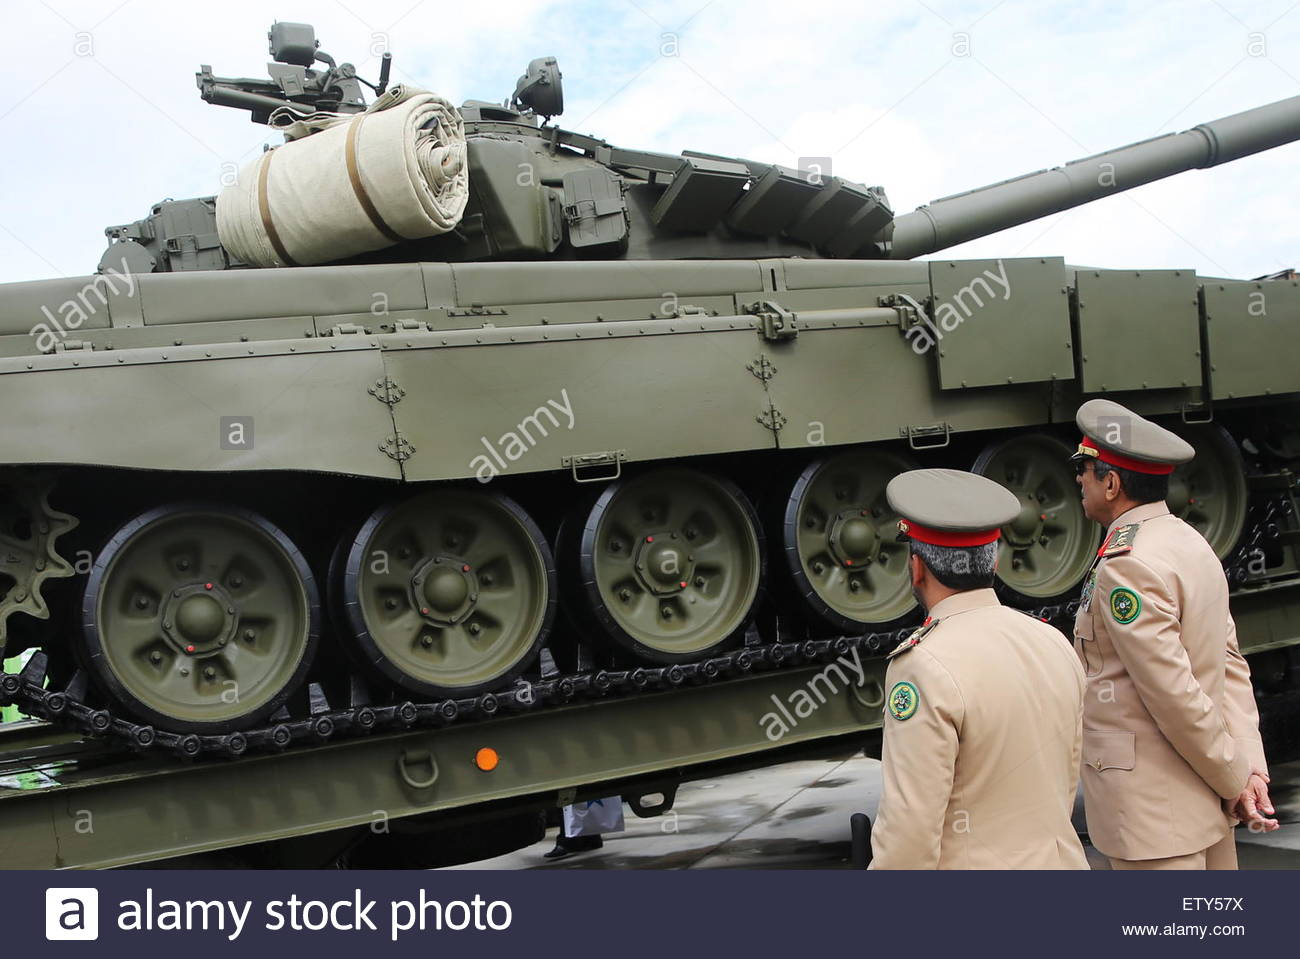 moscow-region-russia-16th-june-2015-people-attend-a-military-exhibition-ETY57X.jpg